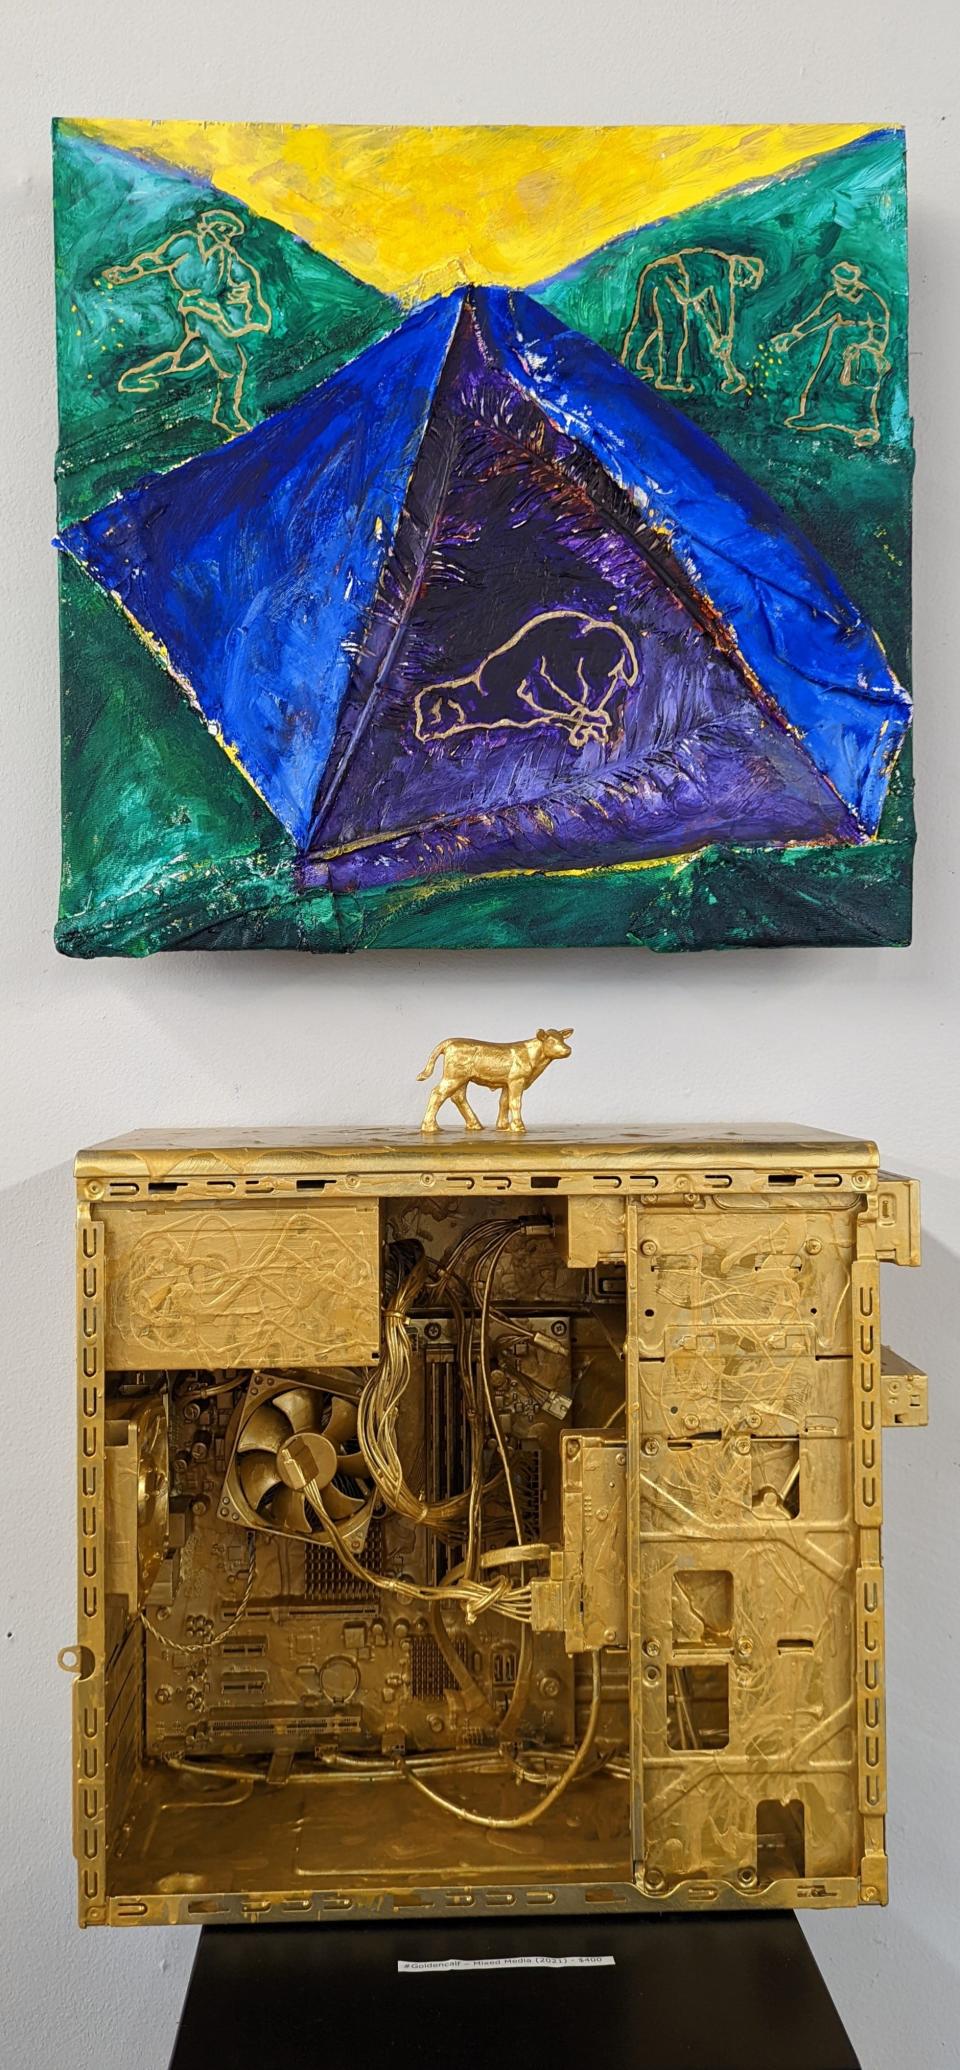 Tom Wachunas' art in his newest exhibit, "Signs and Wonderings" makes use of such ancient biblical symbols as the lamb and the golden calf, and such modern items such as technology.